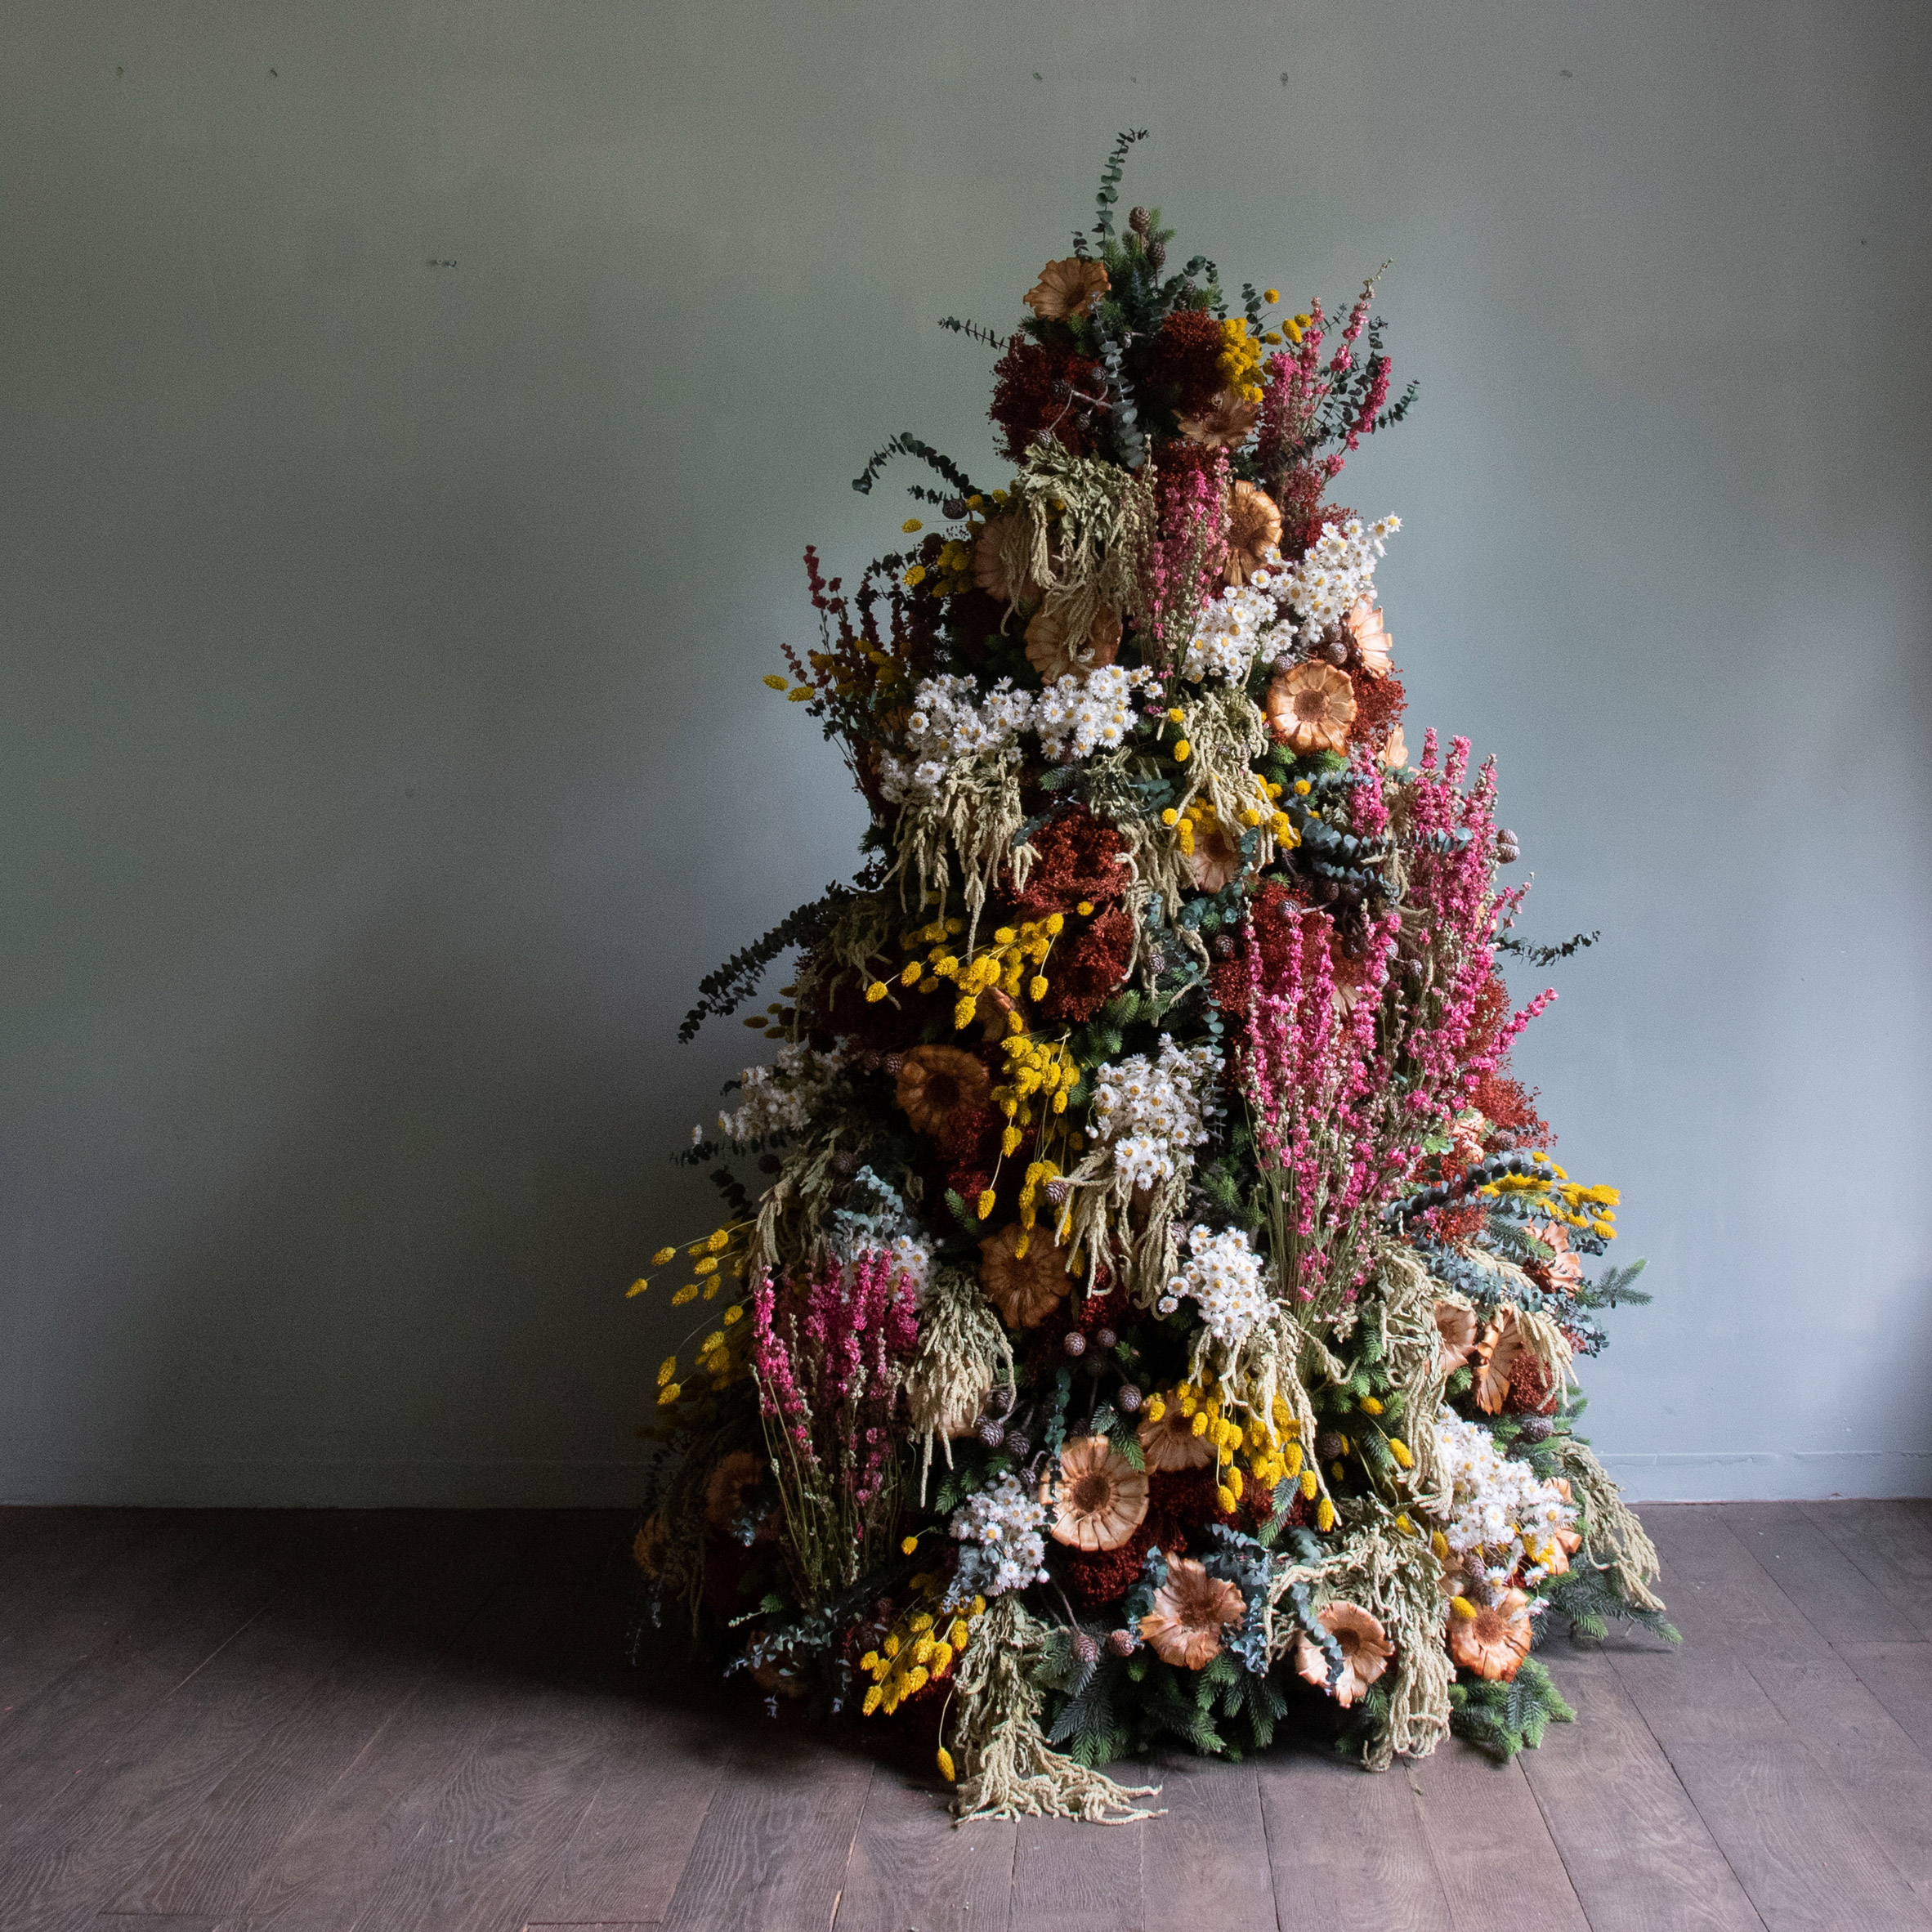 10 of the most original Christmas trees of 2019